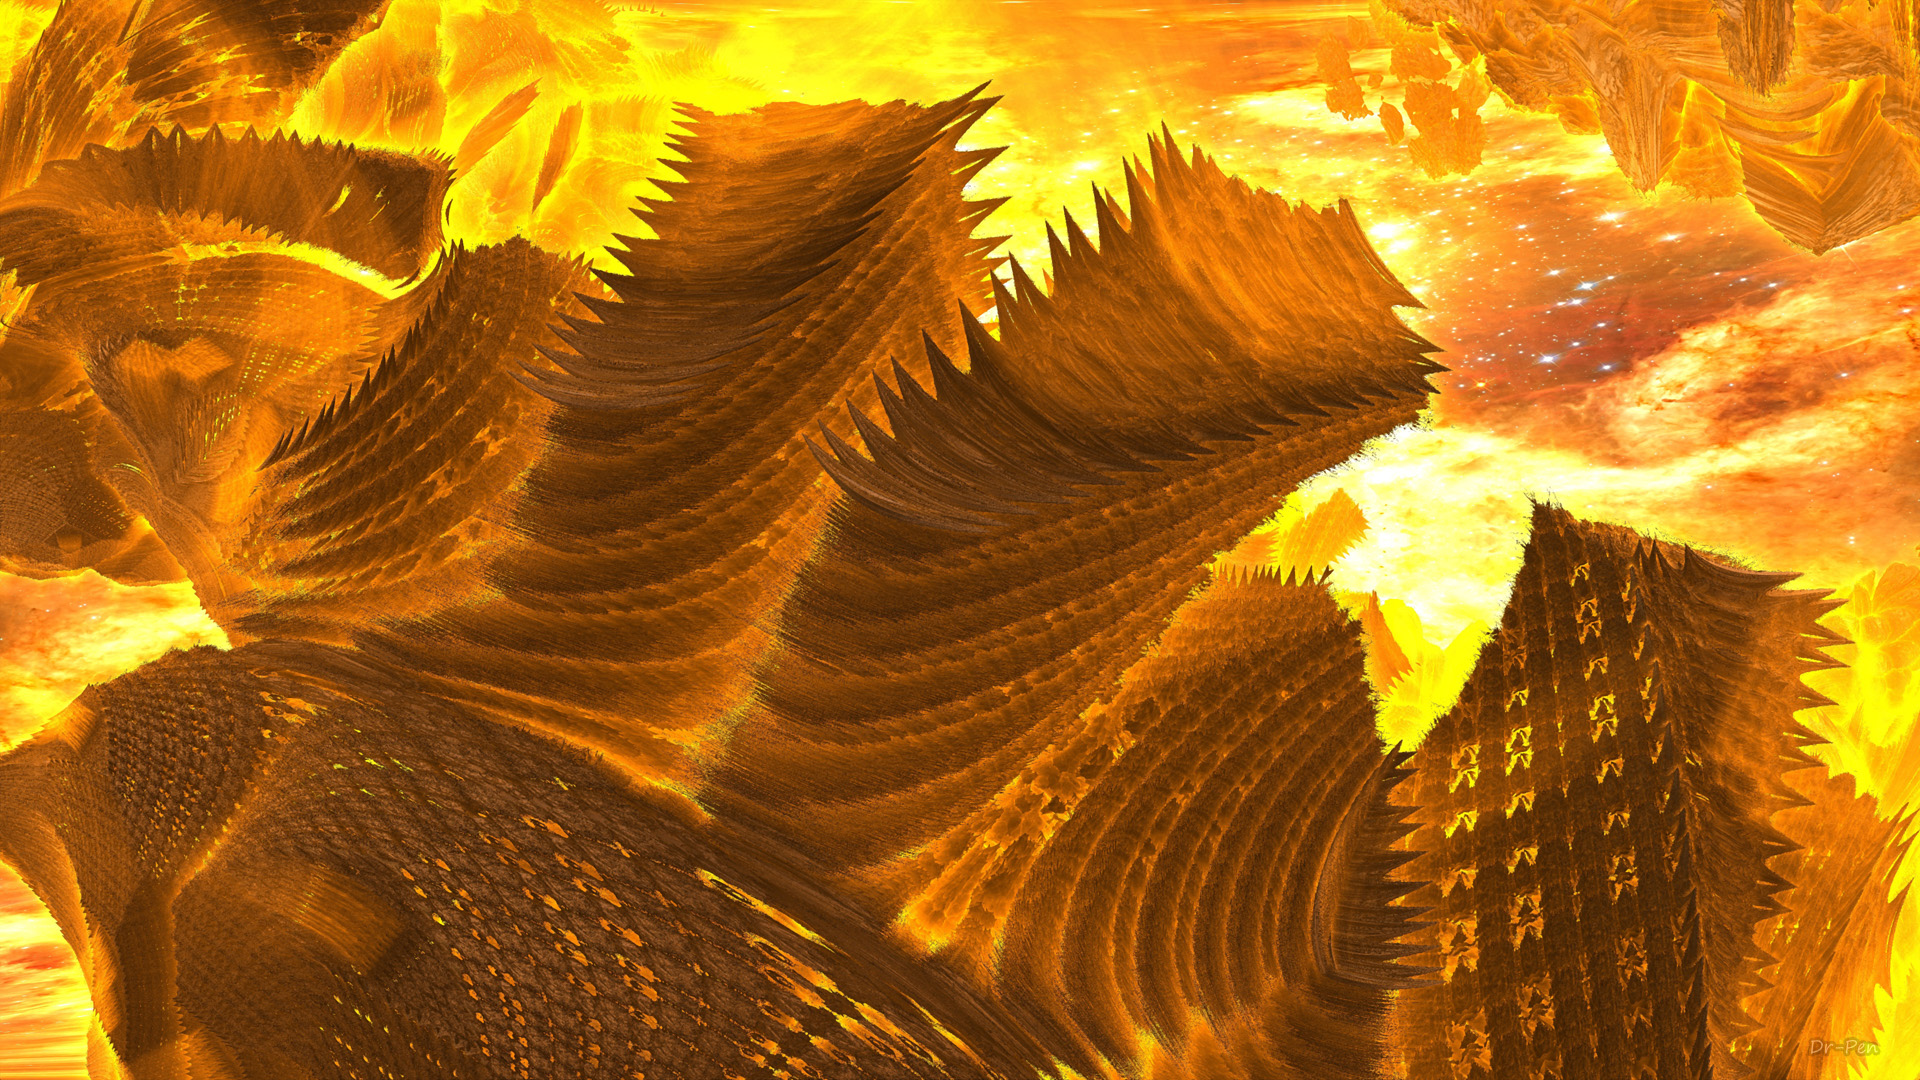 Download mobile wallpaper Abstract, Fire, Flame, 3D, Fractal, Nebula, Space, Sci Fi, Cgi, Mandelbulb 3D for free.